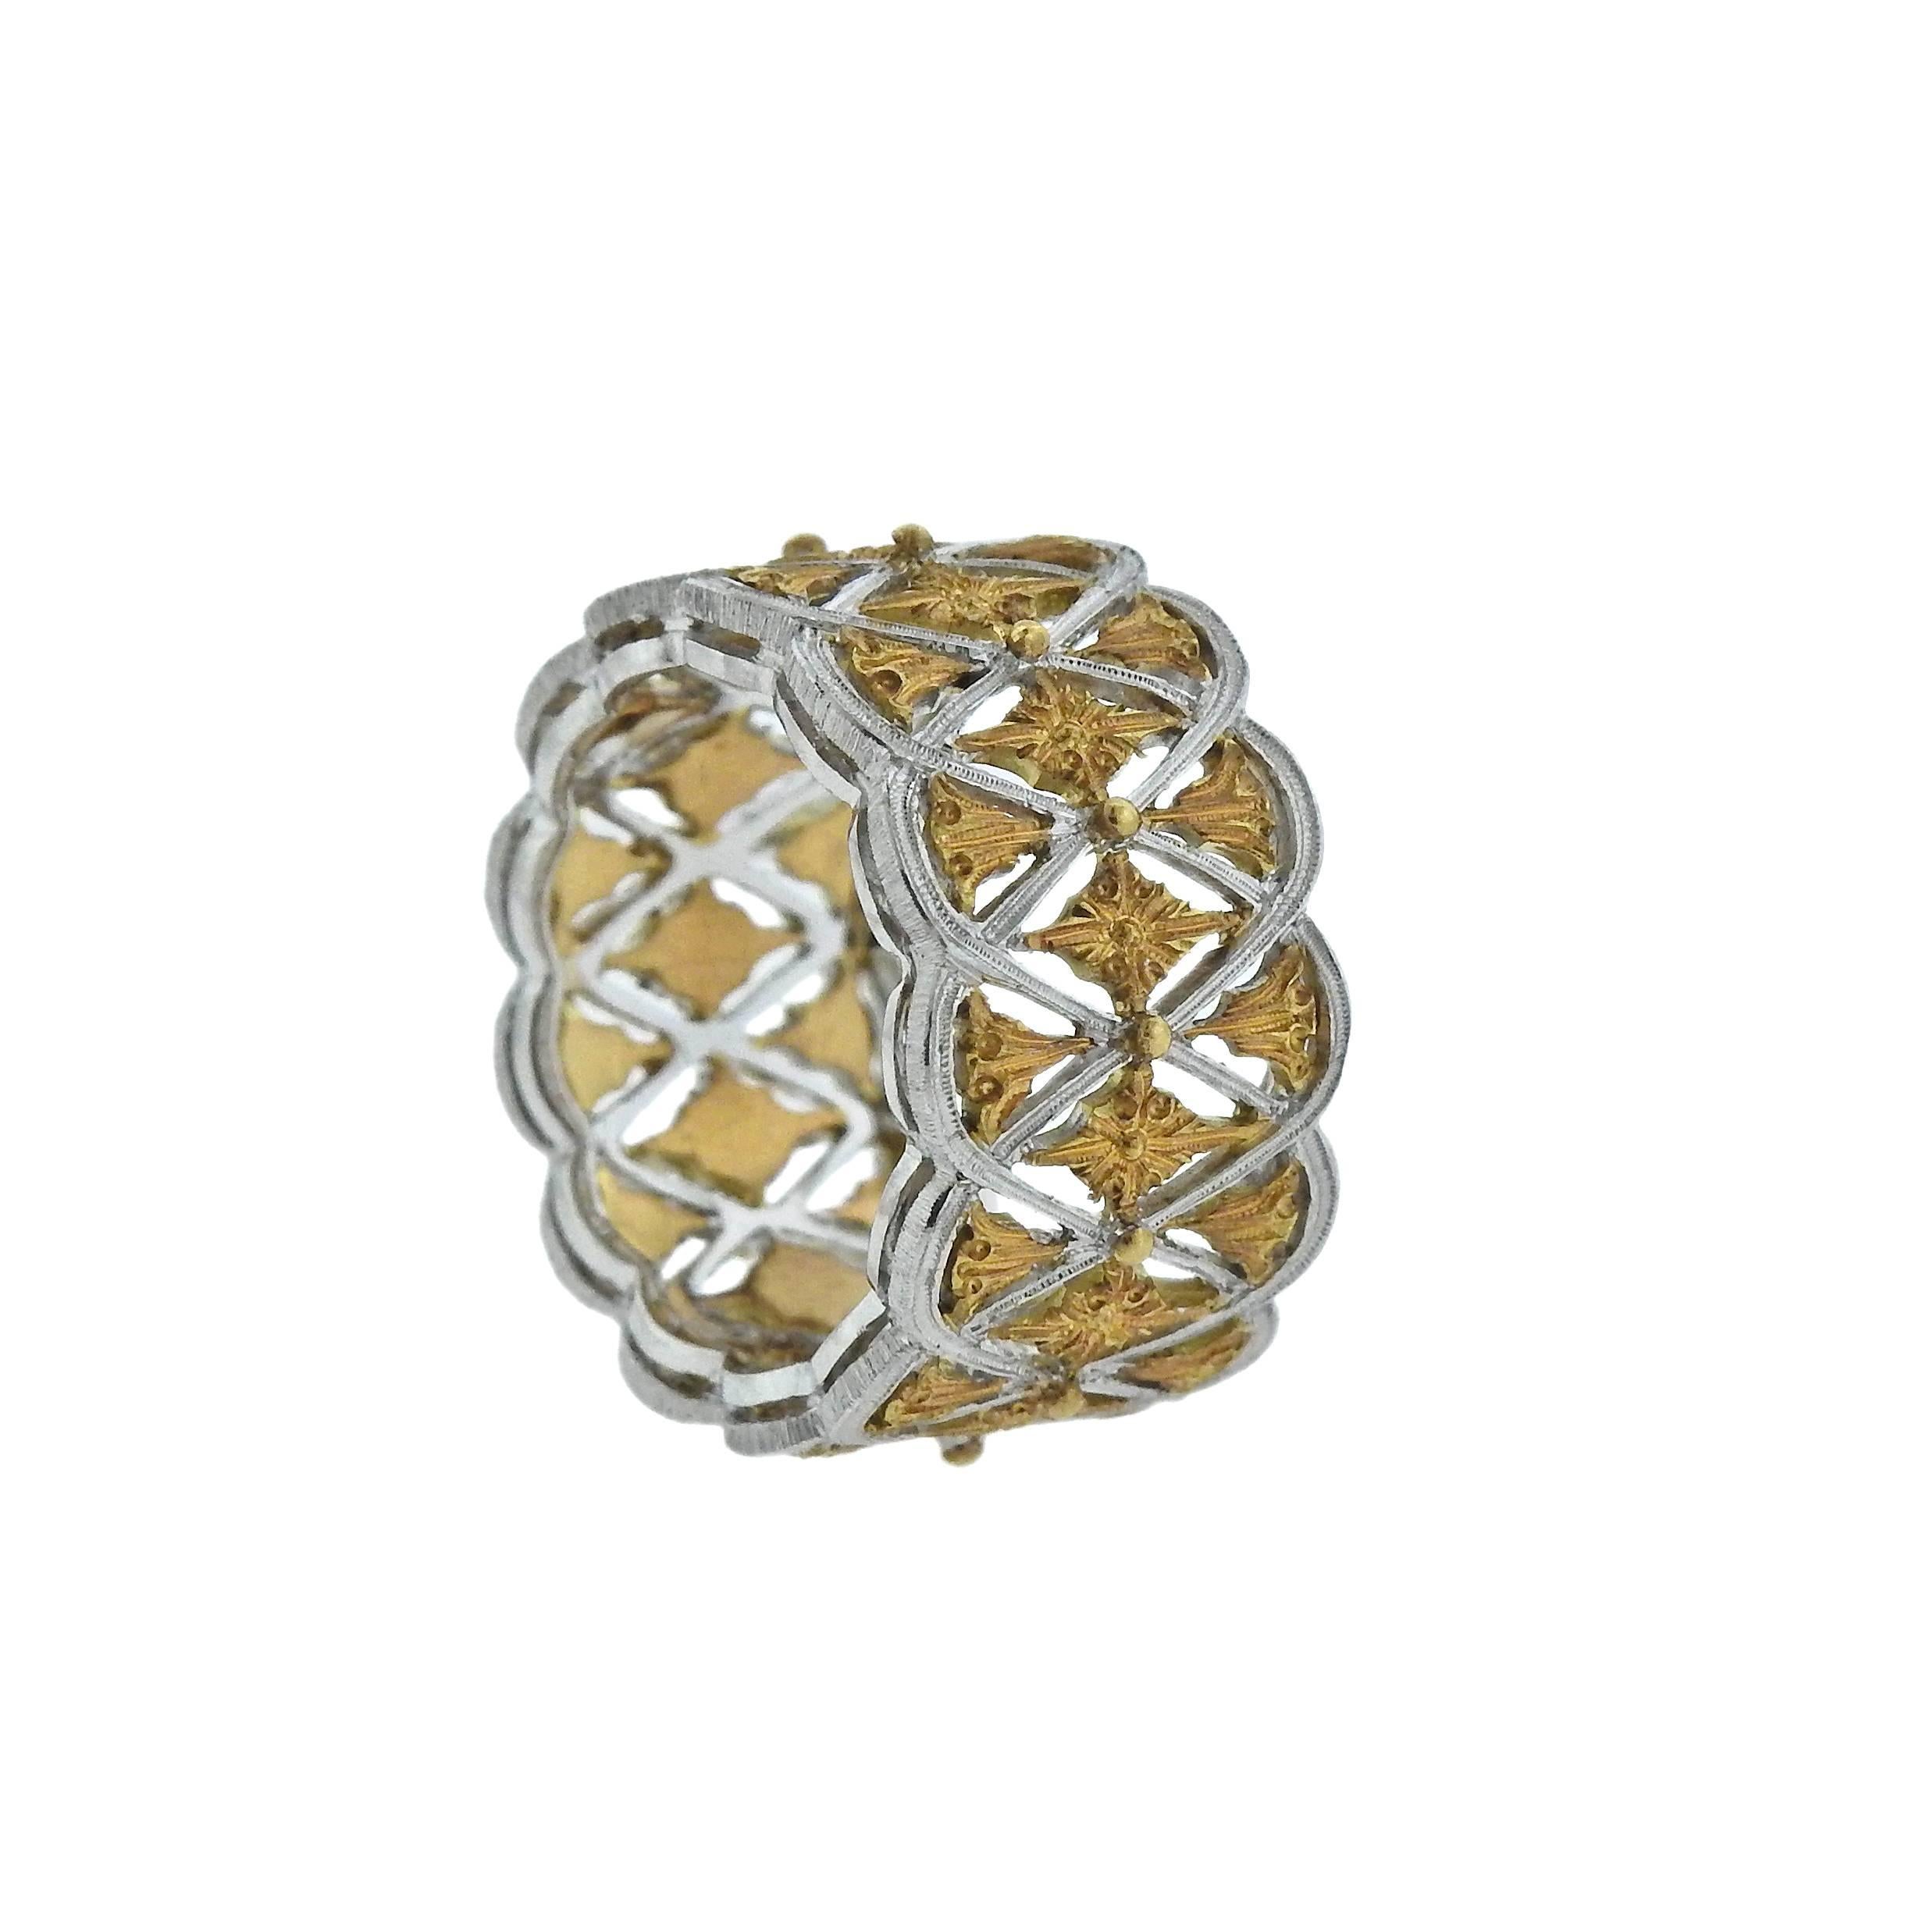 18k yellow and white gold band ring, crafted by Buccellati. Retail $ 8400. Ring size - 5, ring top is 11.2mm wide  , weighs 7.4 grams. Marked: Italy, 18k, Buccellati , BL 750.